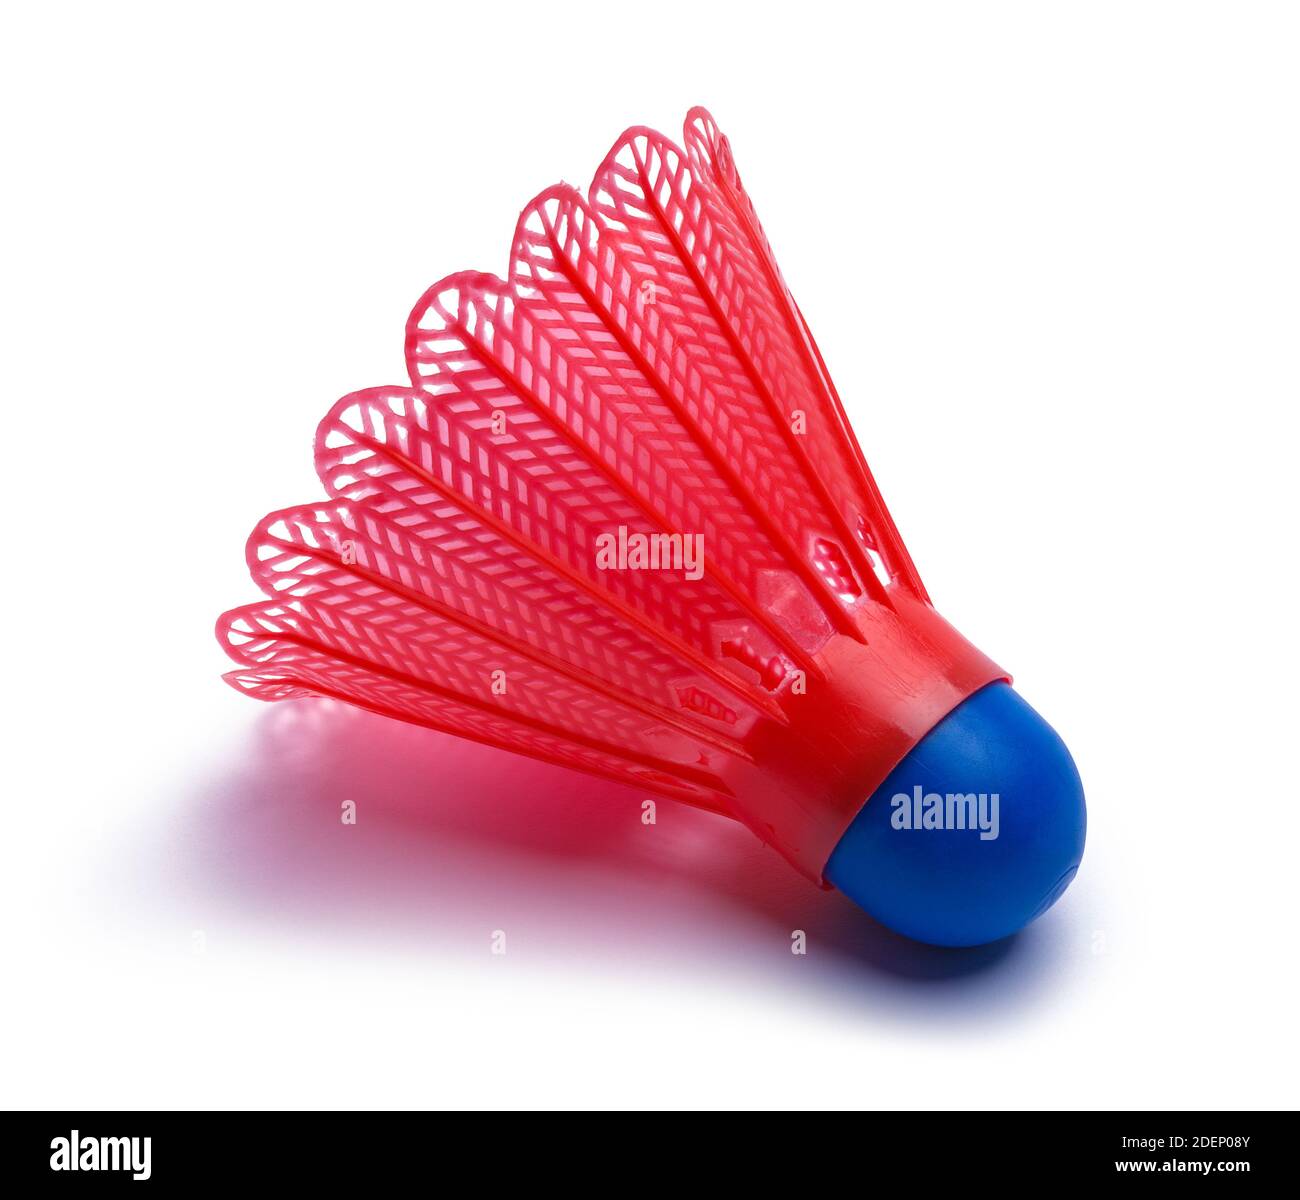 Red and Blue Plastic and Rubber Badminton Birdie. Stock Photo